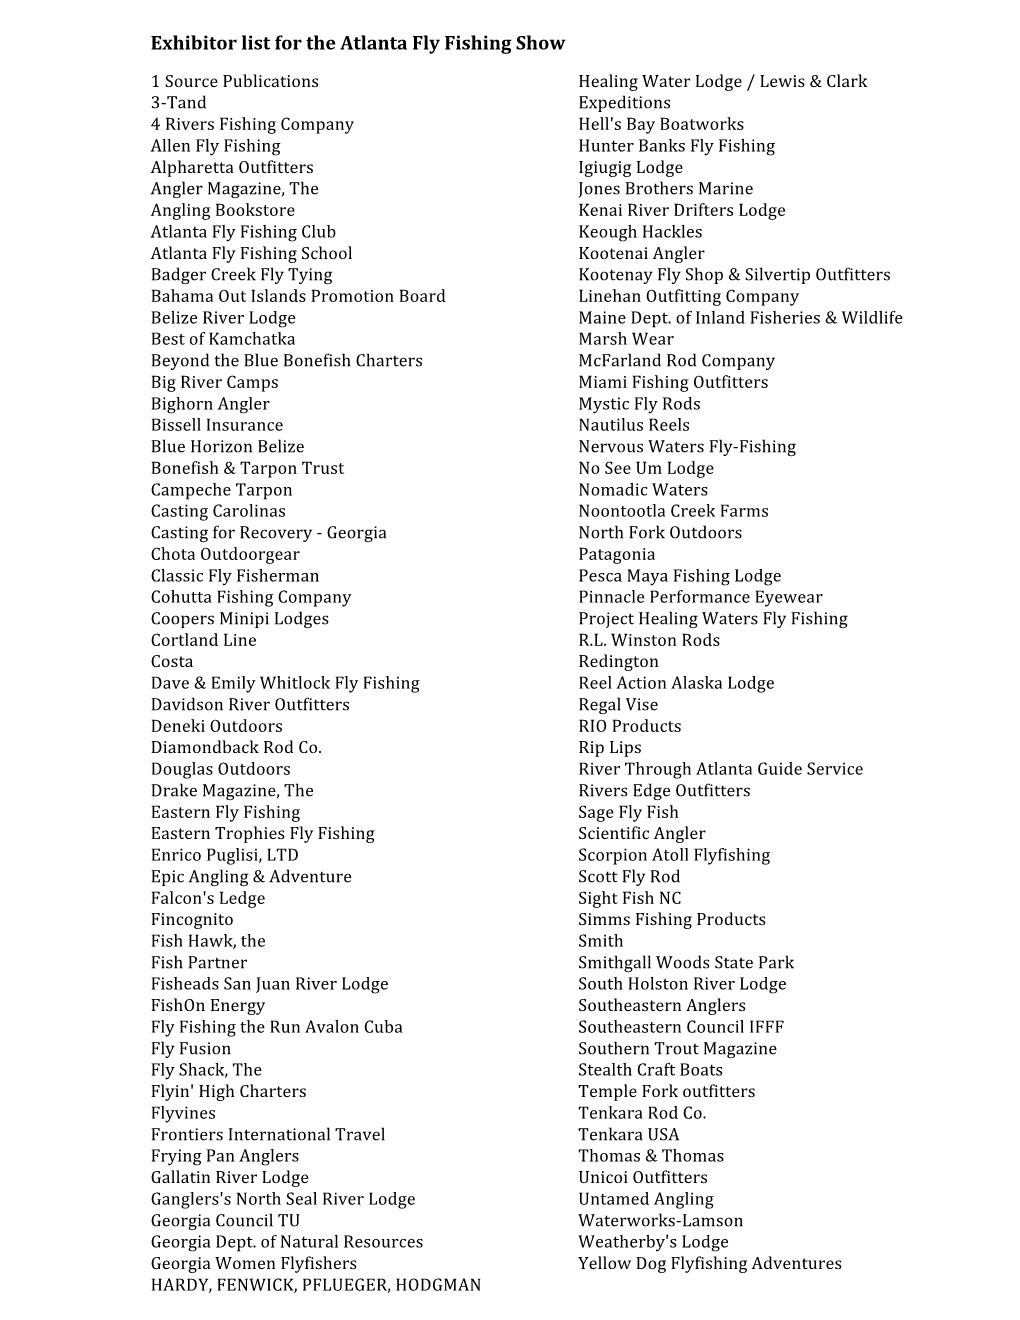 Exhibitor List for the Atlanta Fly Fishing Show